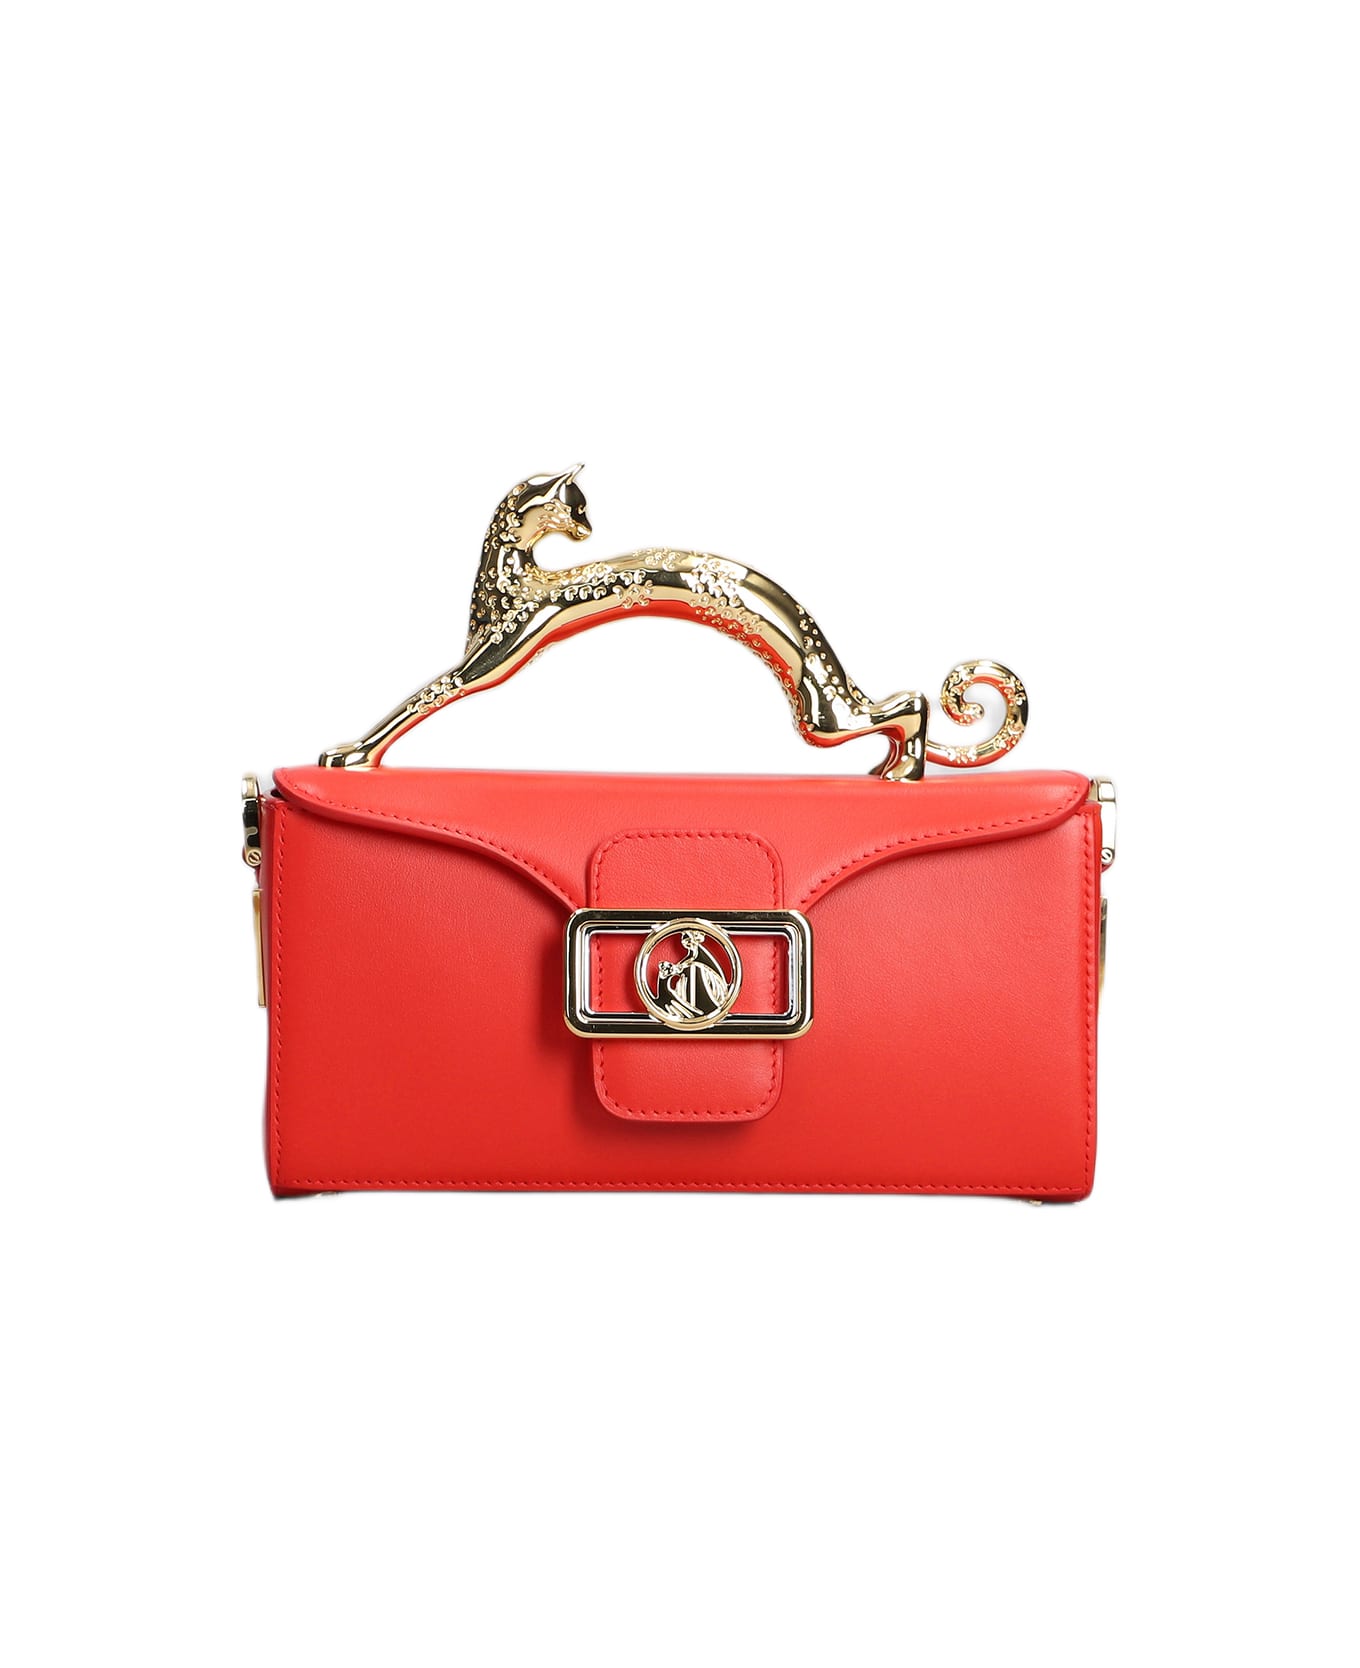 Lanvin Hand Bag In Red Leather - red